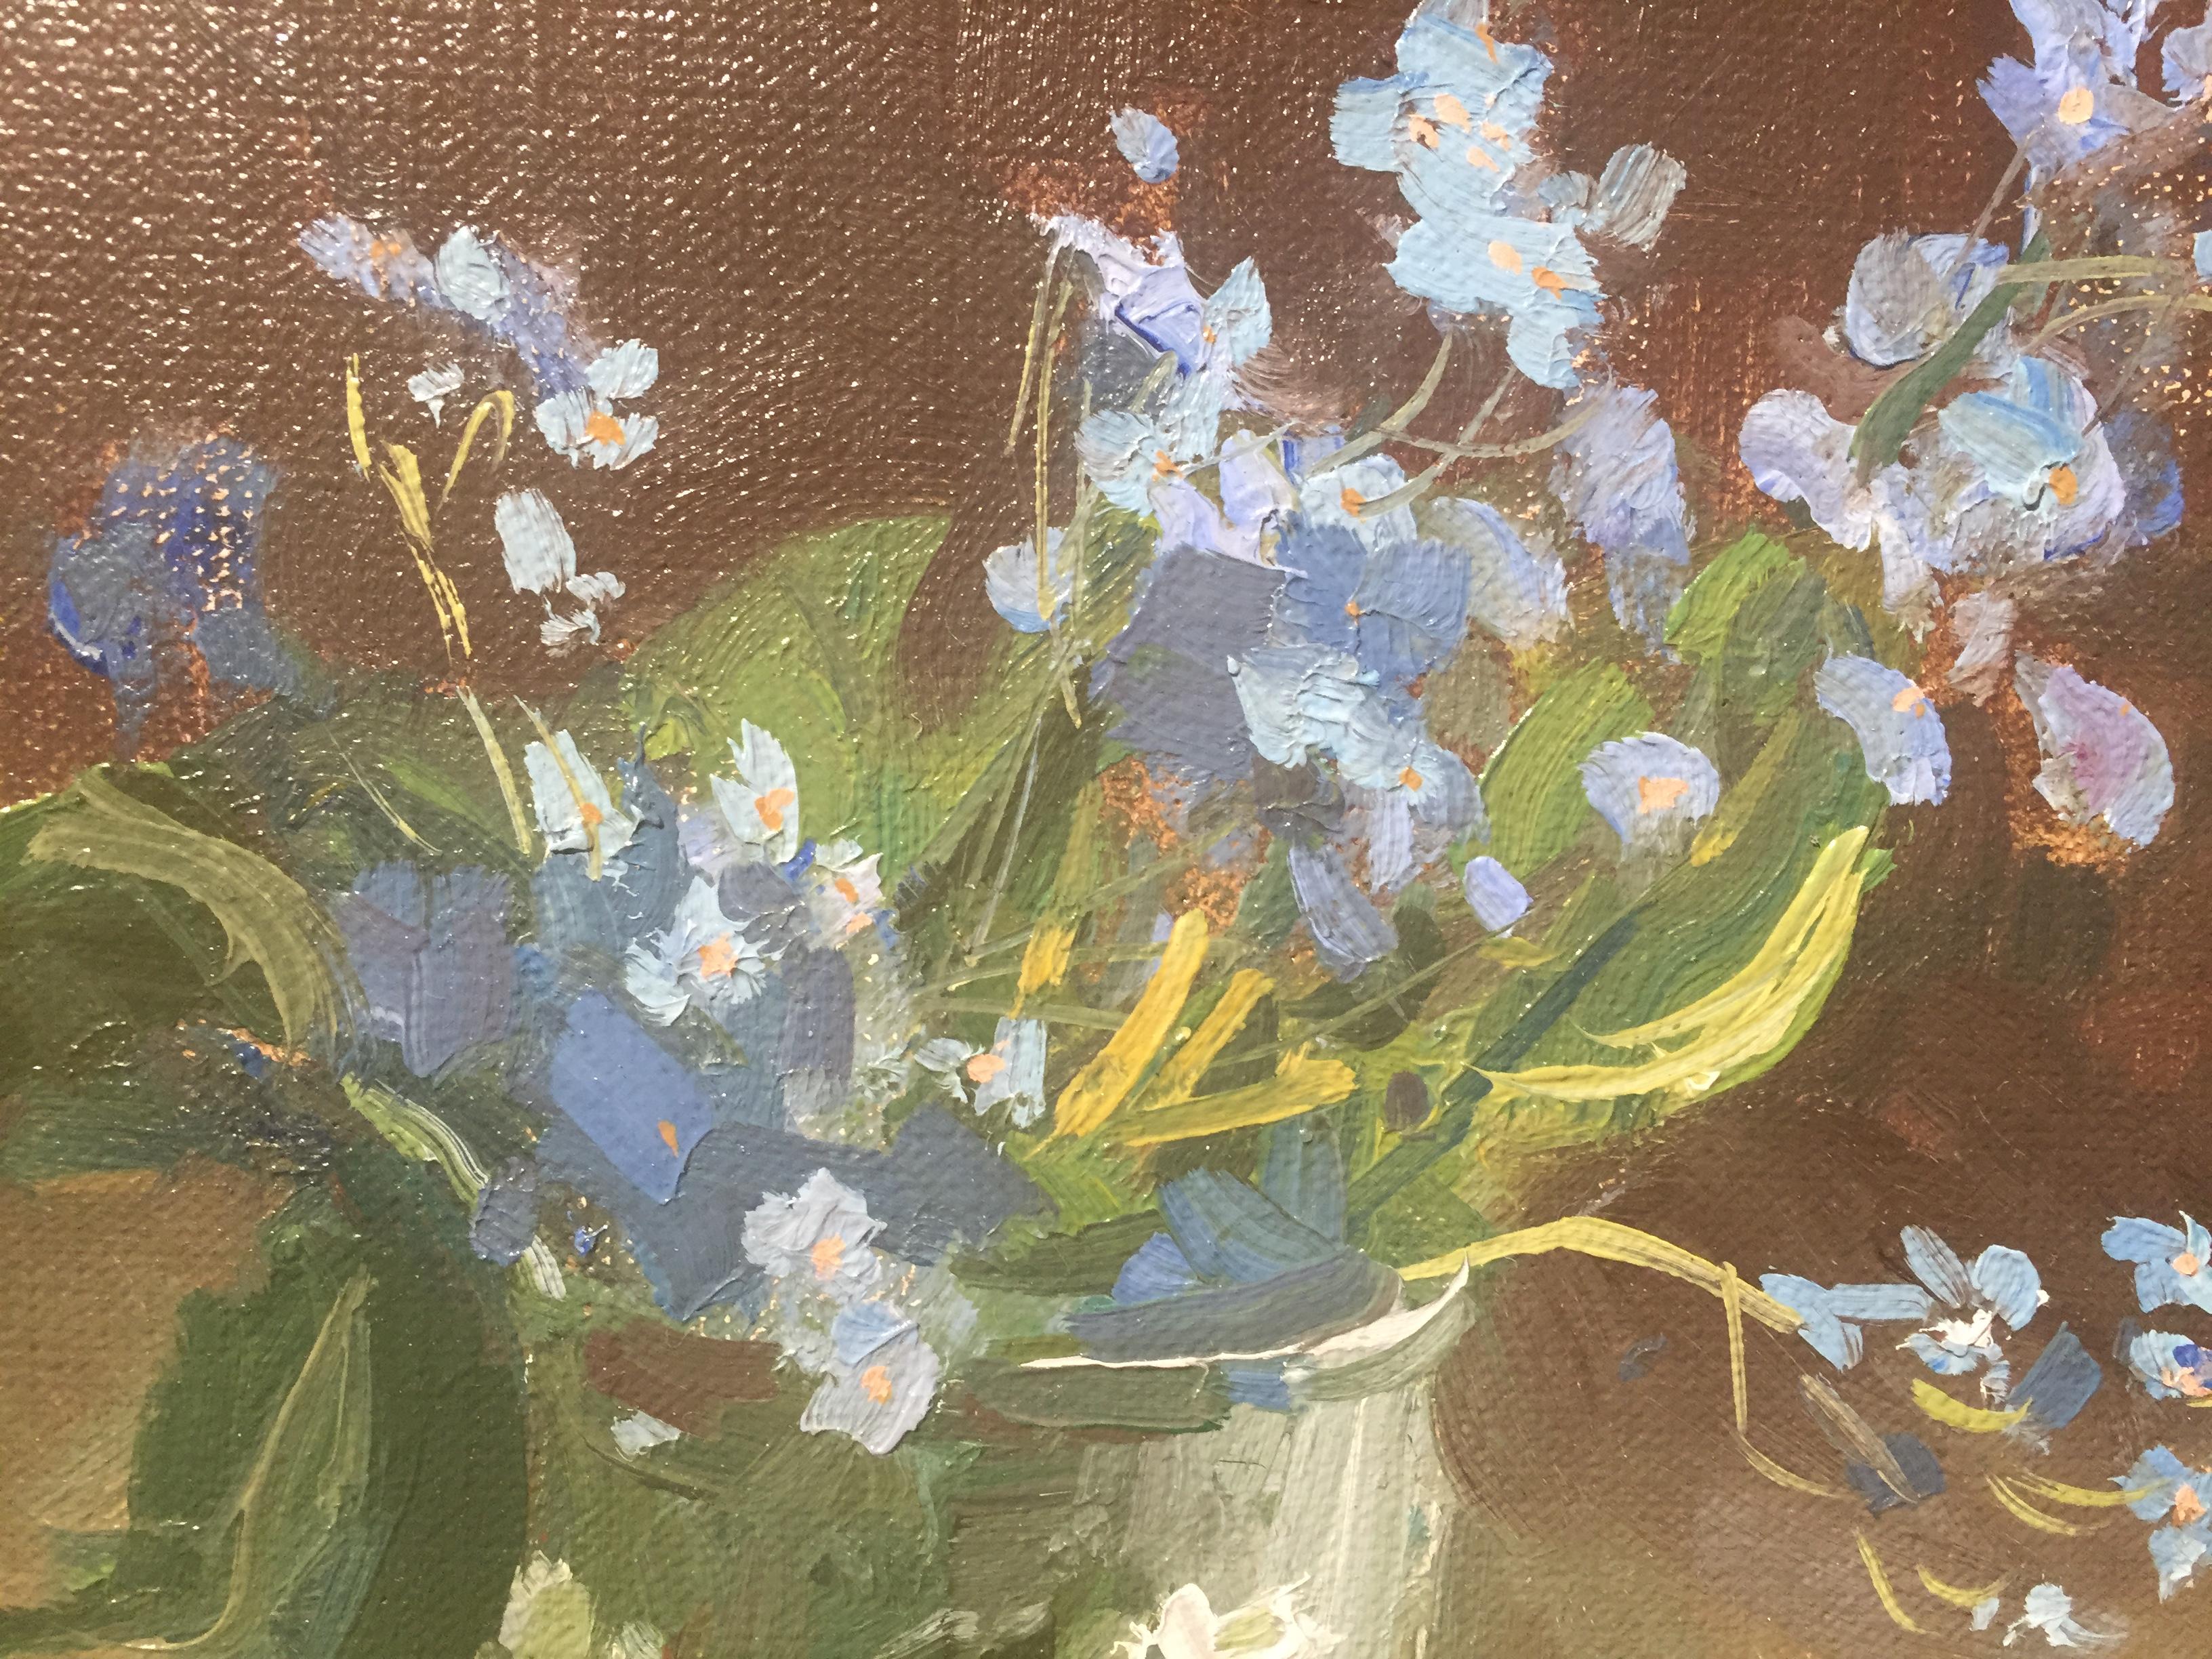 Painted from life while on a trip to Russia, Carmody captured the humility of a small batch of forget-me-nots in a clear glass atop a plate.

Framed dimensions: 16.25 x 15.125 inches

Kelly Carmody has exhibited at venues including the Portrait